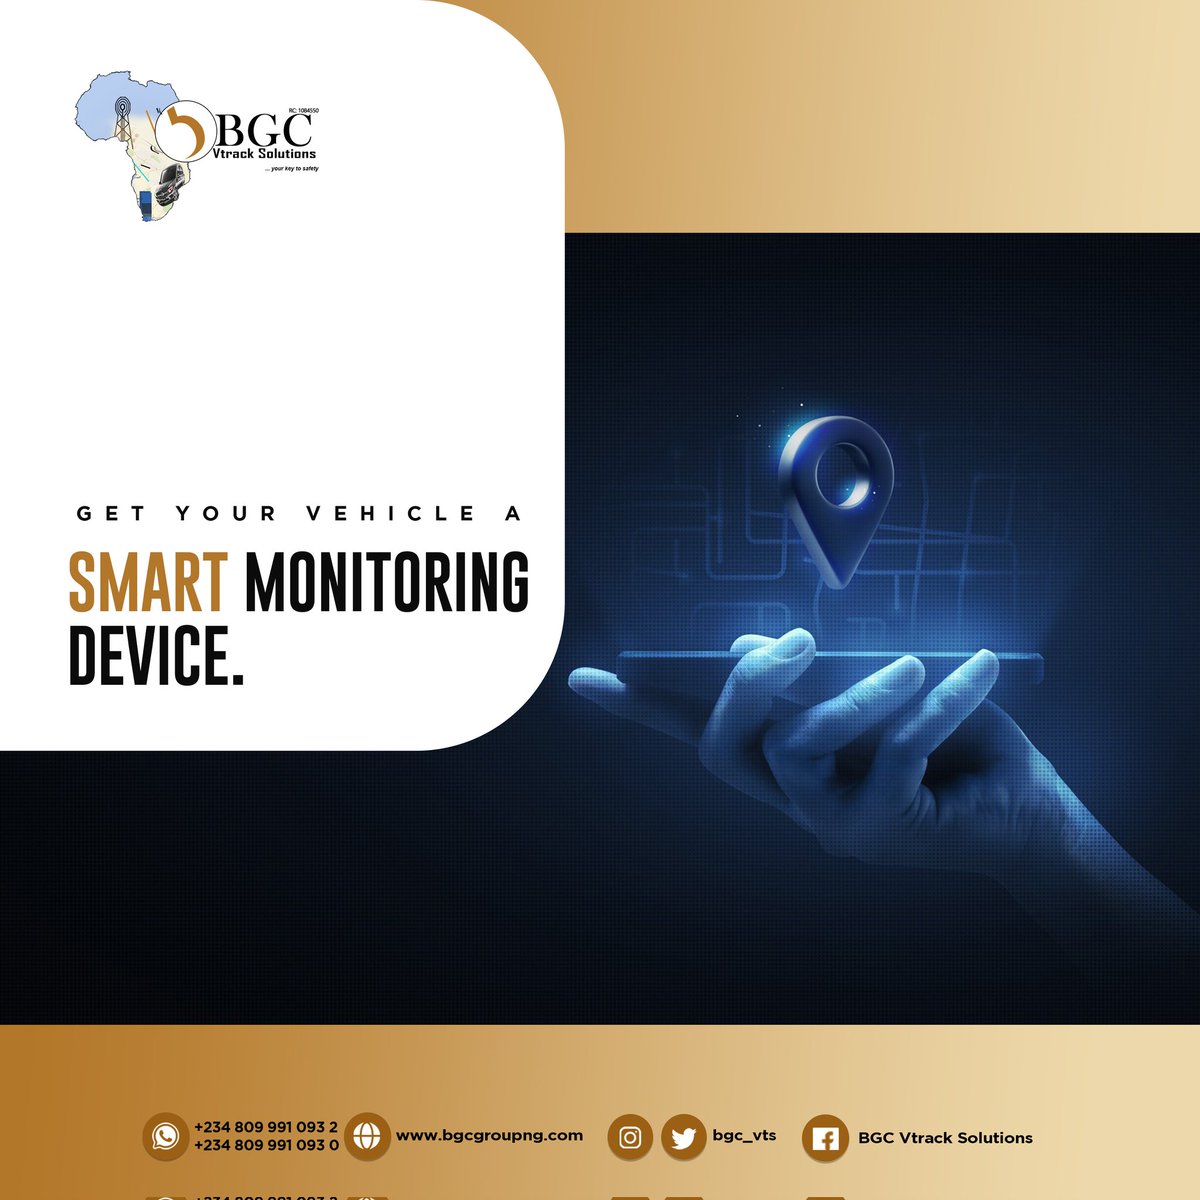 Do you need a SMART MONITORING DEVICE?

Contact us today, let's help you configure one on your smart phone.

Find out more from us!

#trackingdevice #tracking #tracking #trackingmacros #gpslifetime #gpstracking #caroftheday #carstagram #cartheft #car #luxurycars